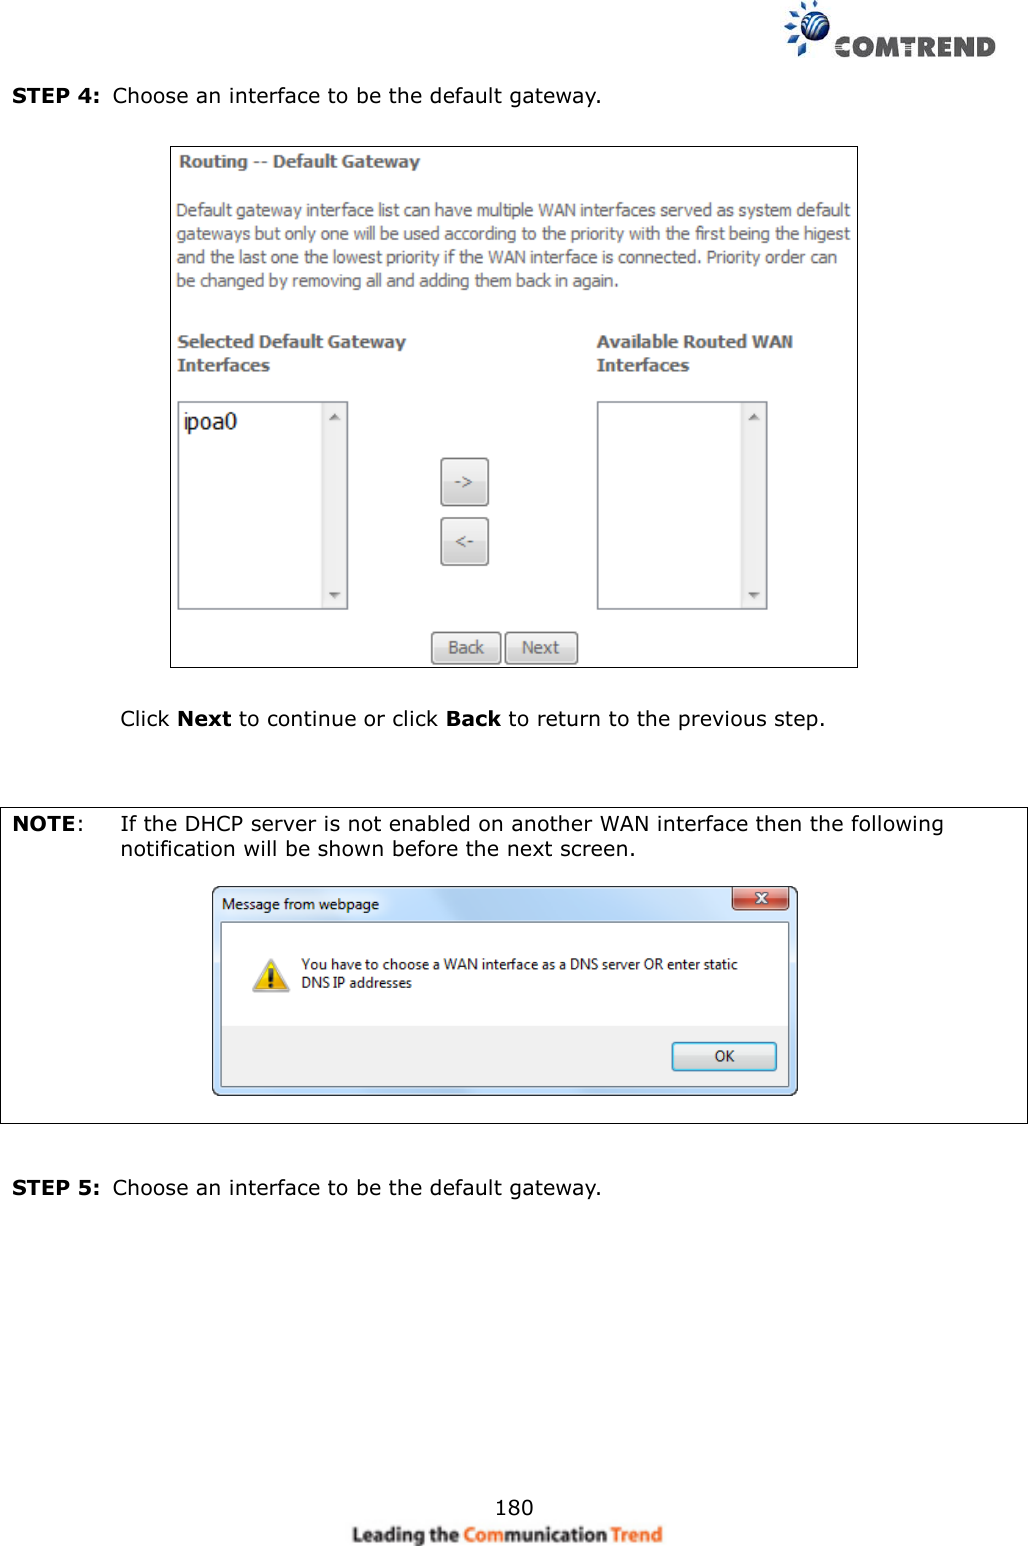     180 STEP 4:  Choose an interface to be the default gateway.      Click Next to continue or click Back to return to the previous step.    NOTE:  If the DHCP server is not enabled on another WAN interface then the following notification will be shown before the next screen.                    STEP 5:  Choose an interface to be the default gateway.  